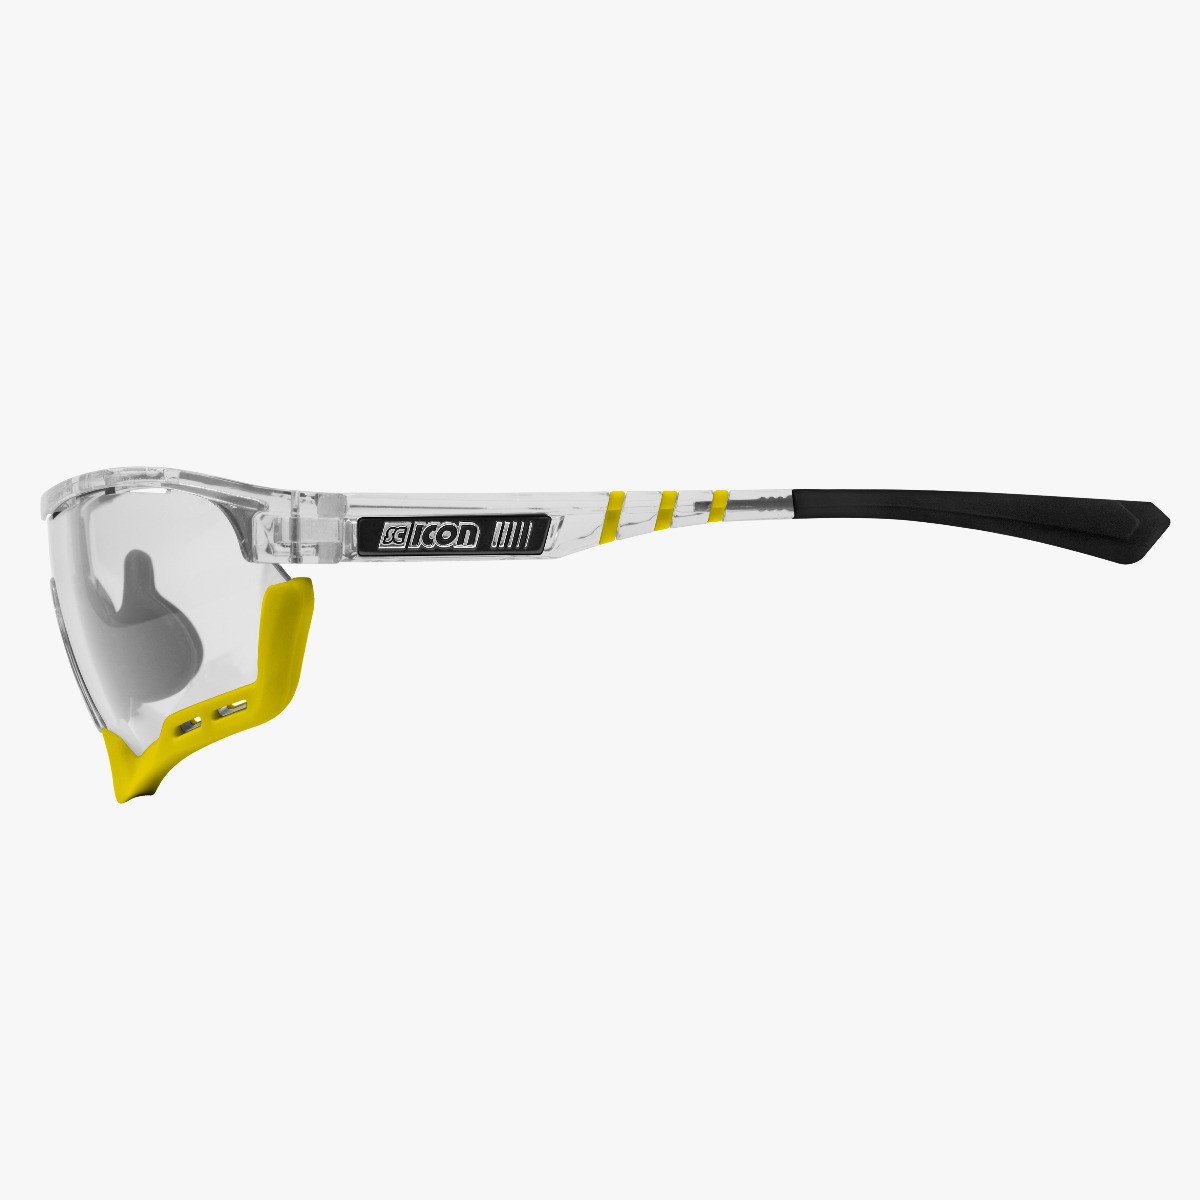 Scicon Sports | Aerotech Sport Cycling Performance Sunglasses - Crystal / Photocromatic Silver - EY13180705